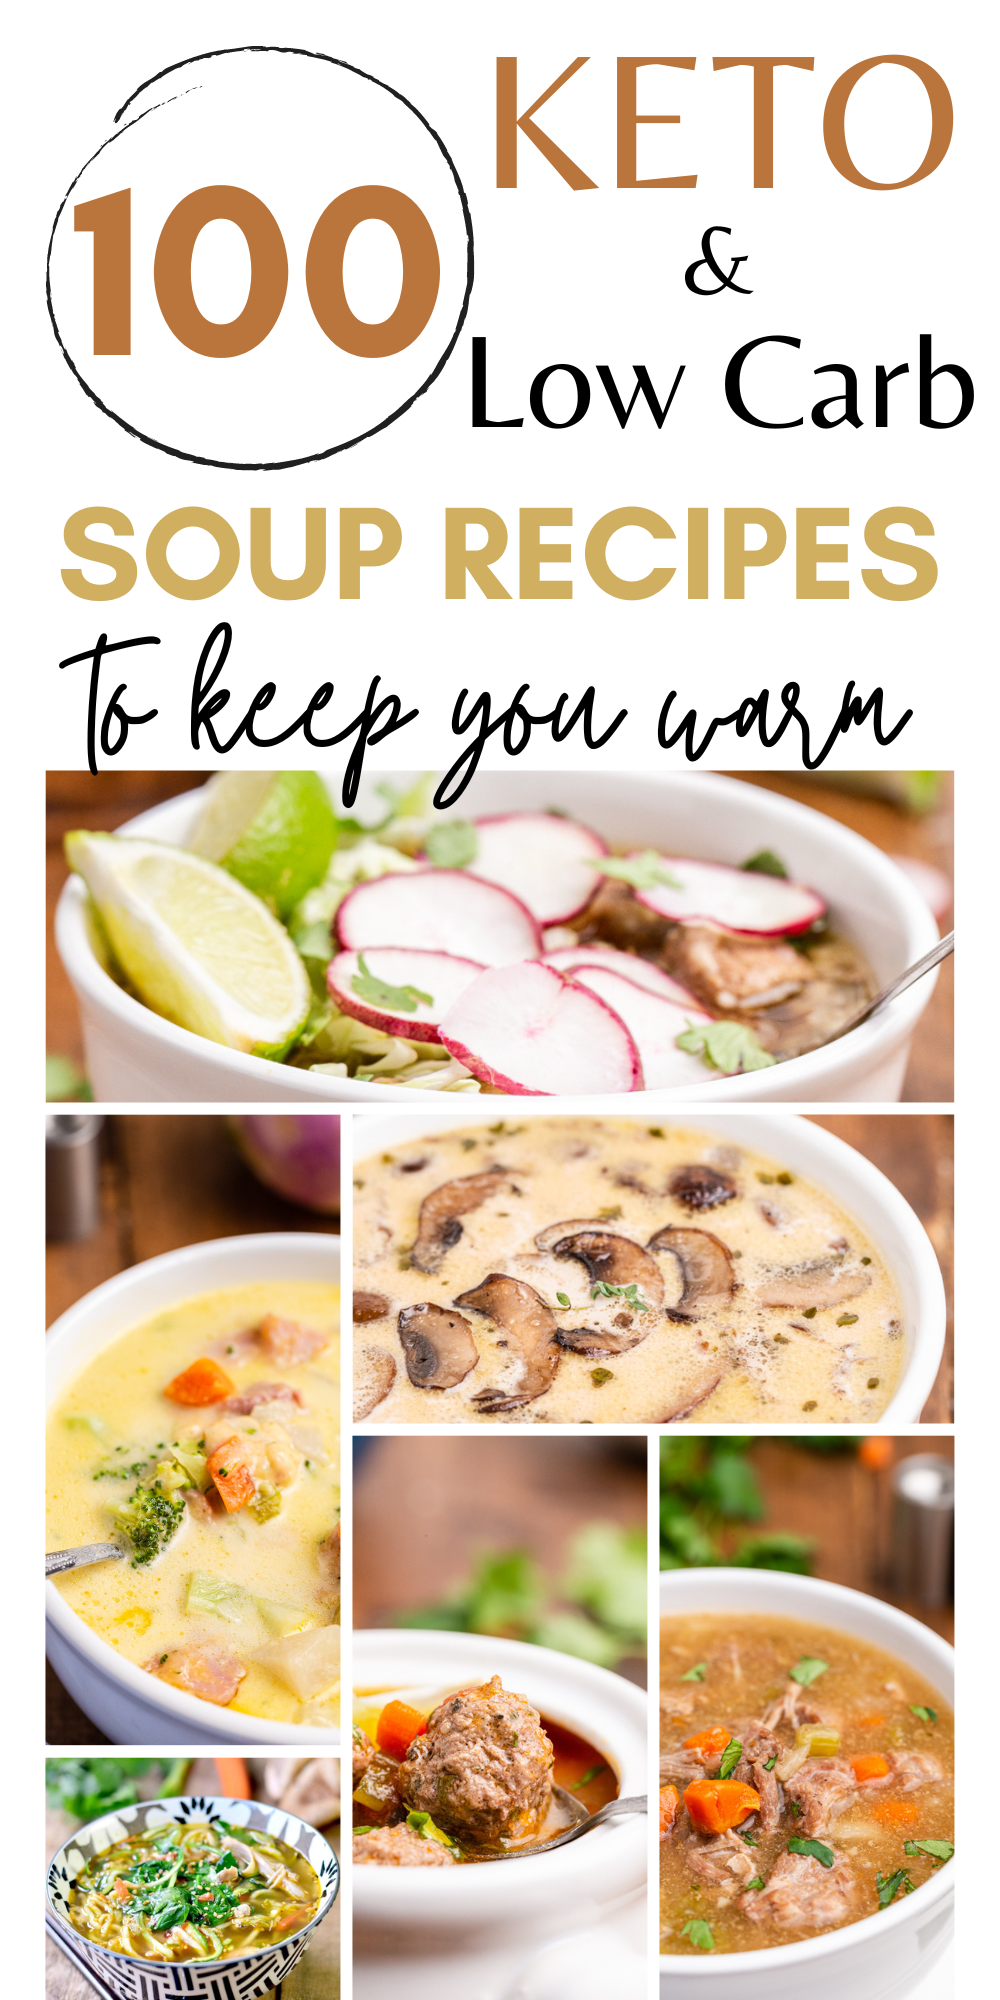 100 Keto & Low Carb Soup Recipes - Are you looking for some delicious keto soups to prepare this season? Look no further than these 100 keto and low carb soup recipes. They will warm you up without weighing you down. #keto #lowcarb #soup #stew #chowder #chicken #beef #pork #seafood